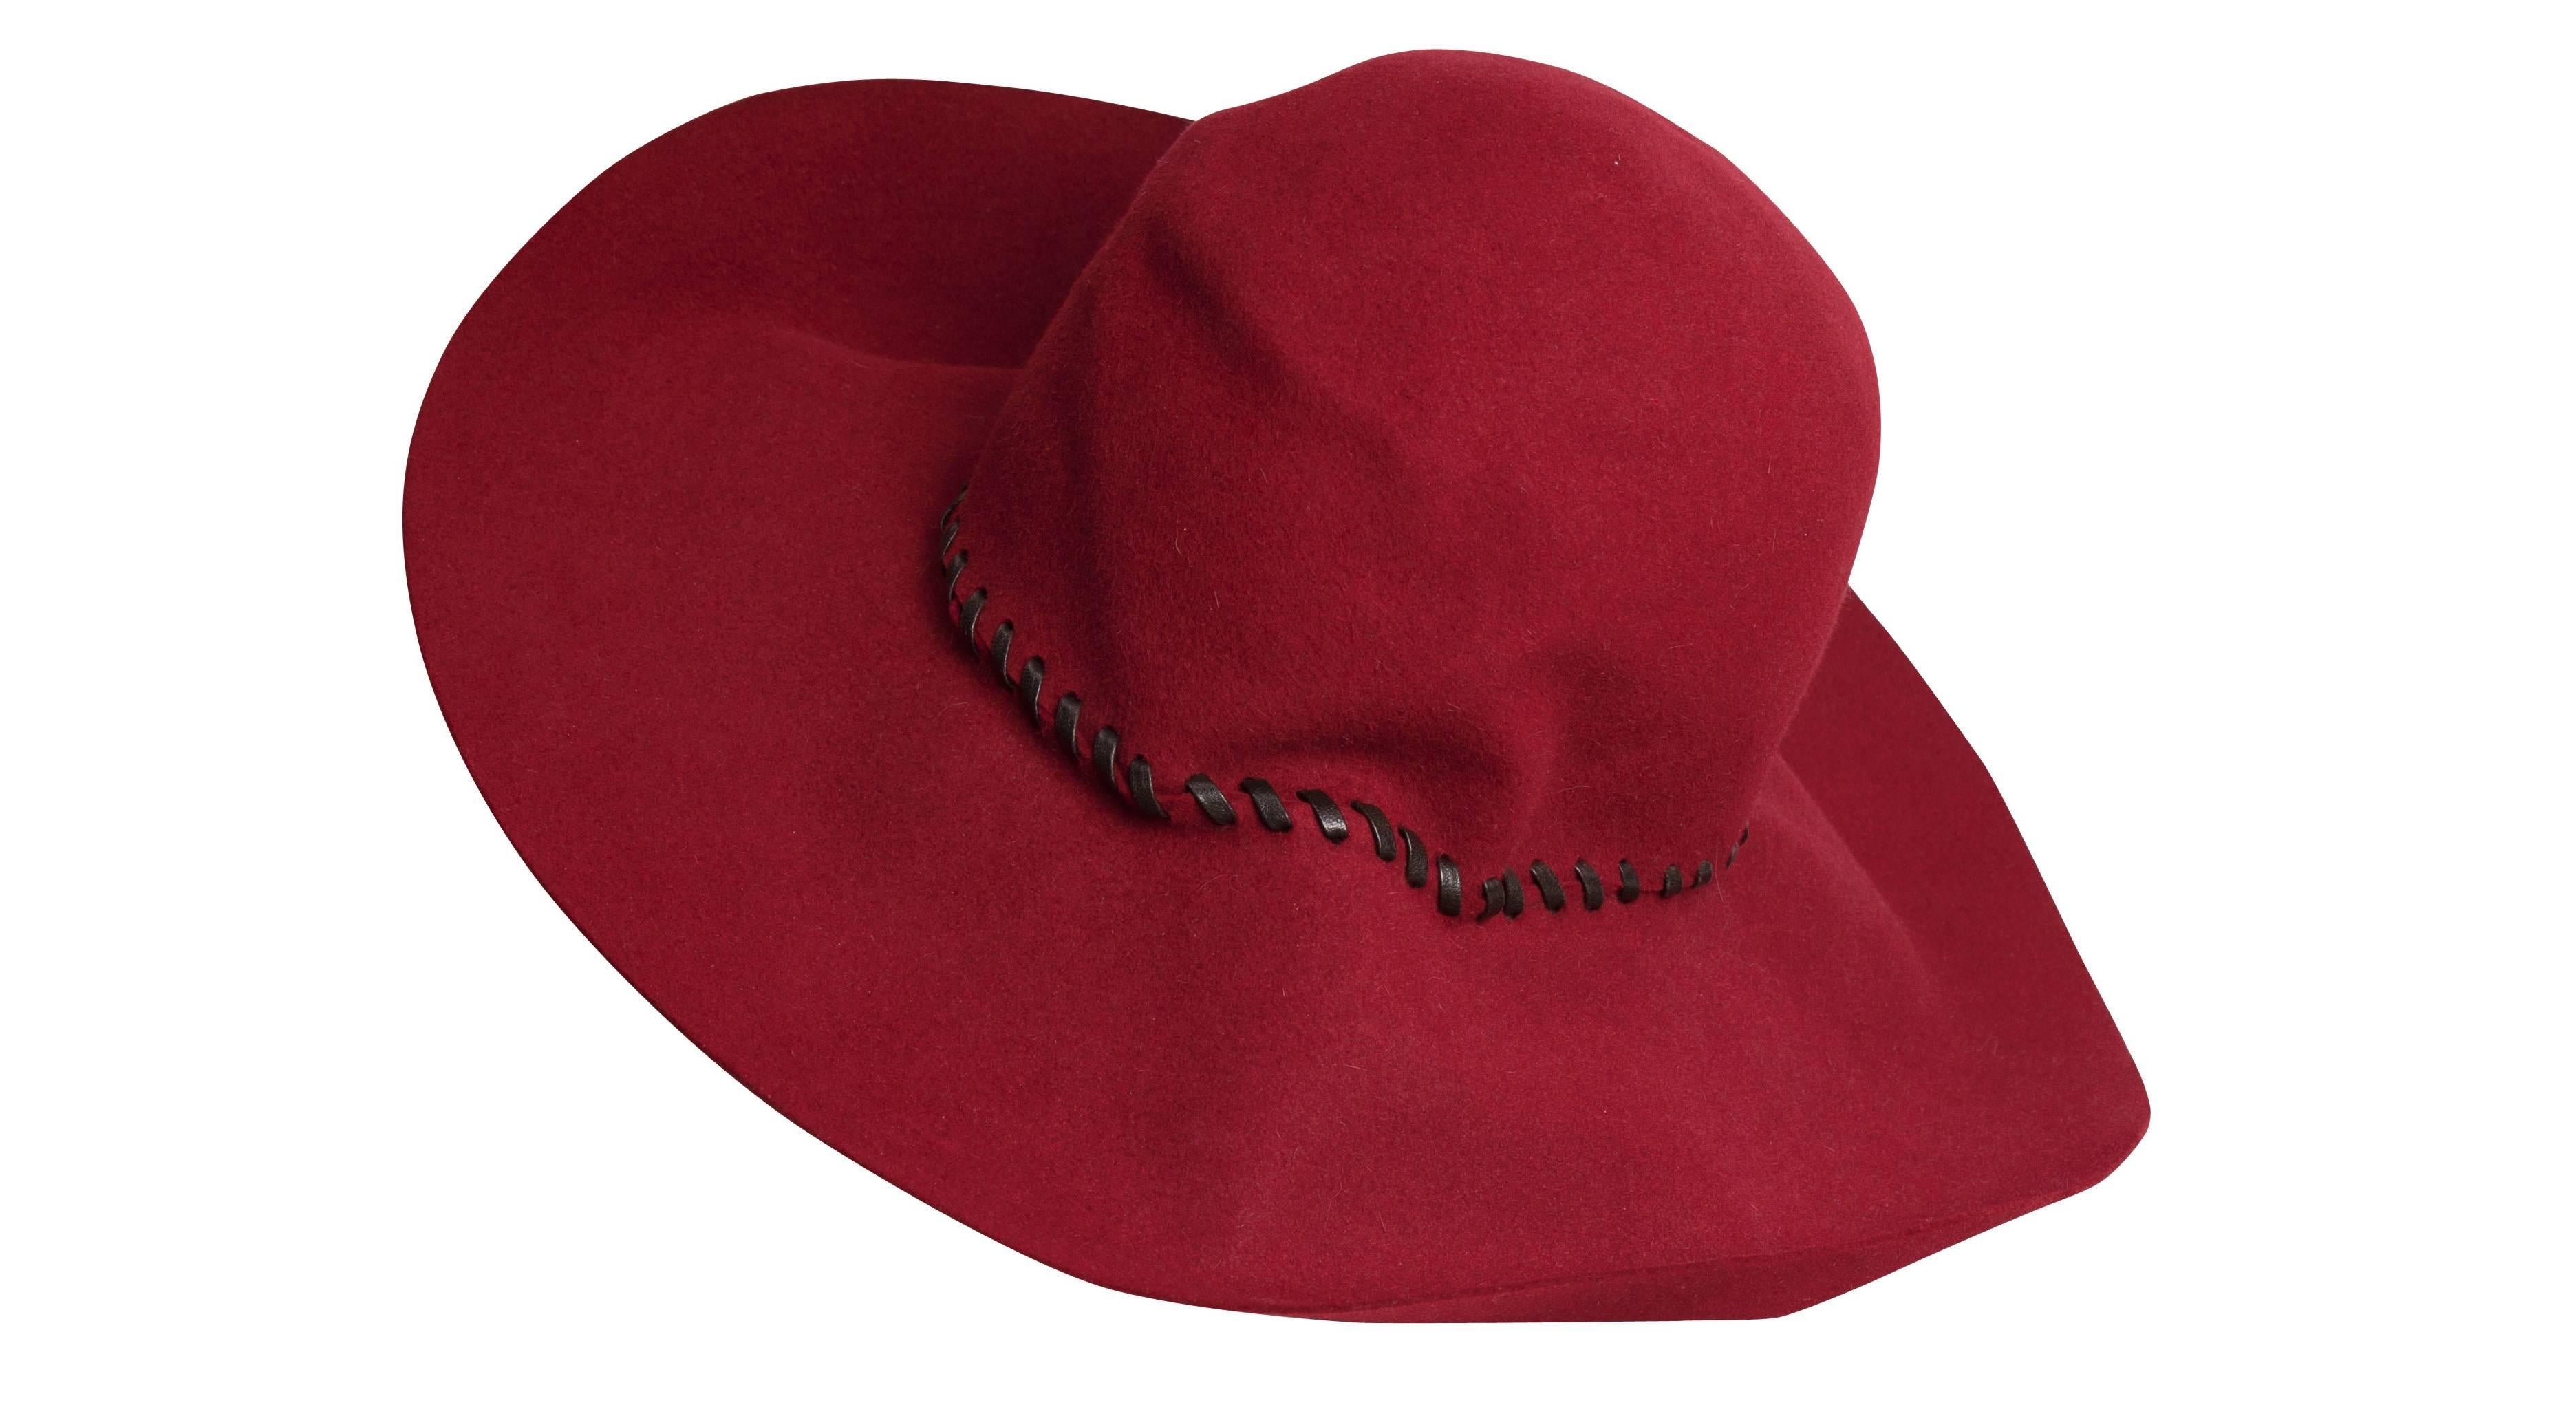 A 1970s Yves Saint Laurent Couture crimson floppy wide-brimmed felt hat, featured in the 1970 issue of L'officiel magazine. The hat features black leather diagonal stitching around the crown and a dark brown fabric interior seam. Excellent